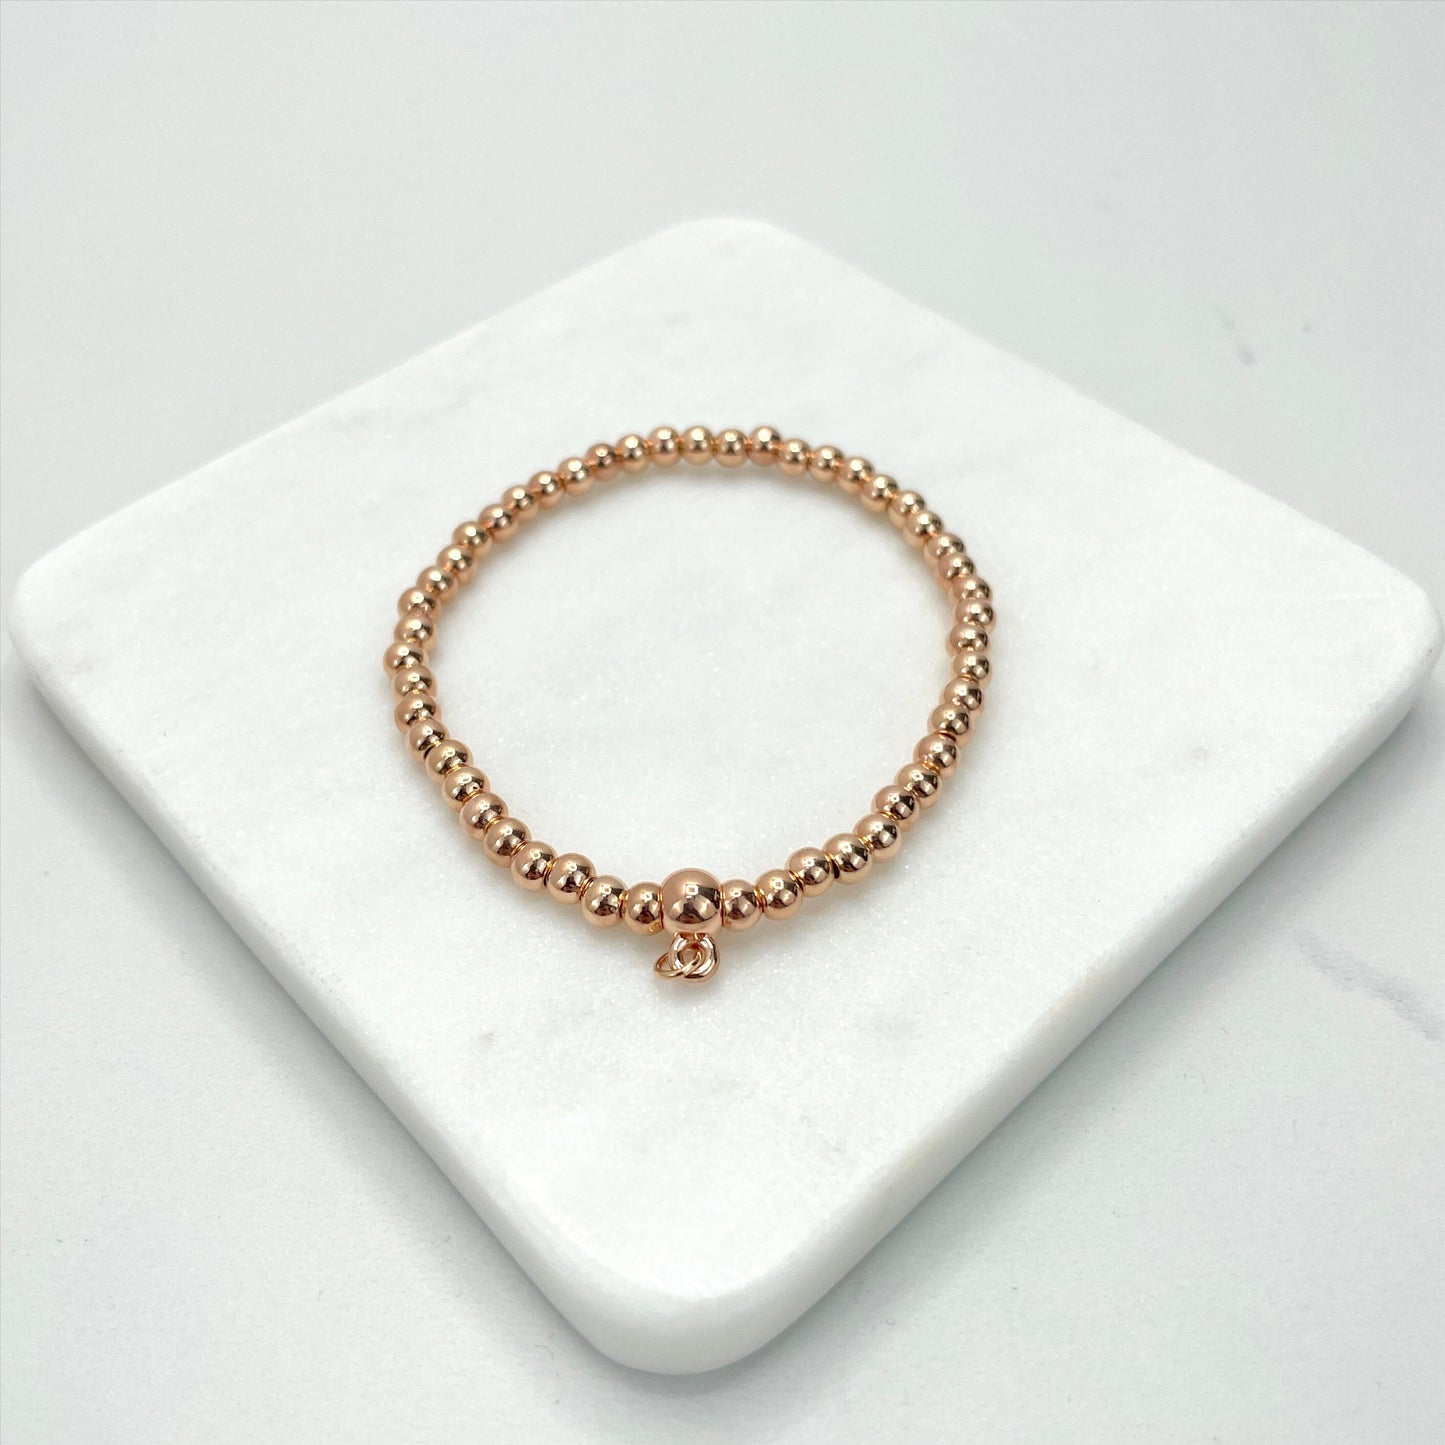 18k Rose Gold Filled Beads 10mm, 8mm, 6mm or 4mm, Beaded Bracelet Wholesale Jewelry Supplies